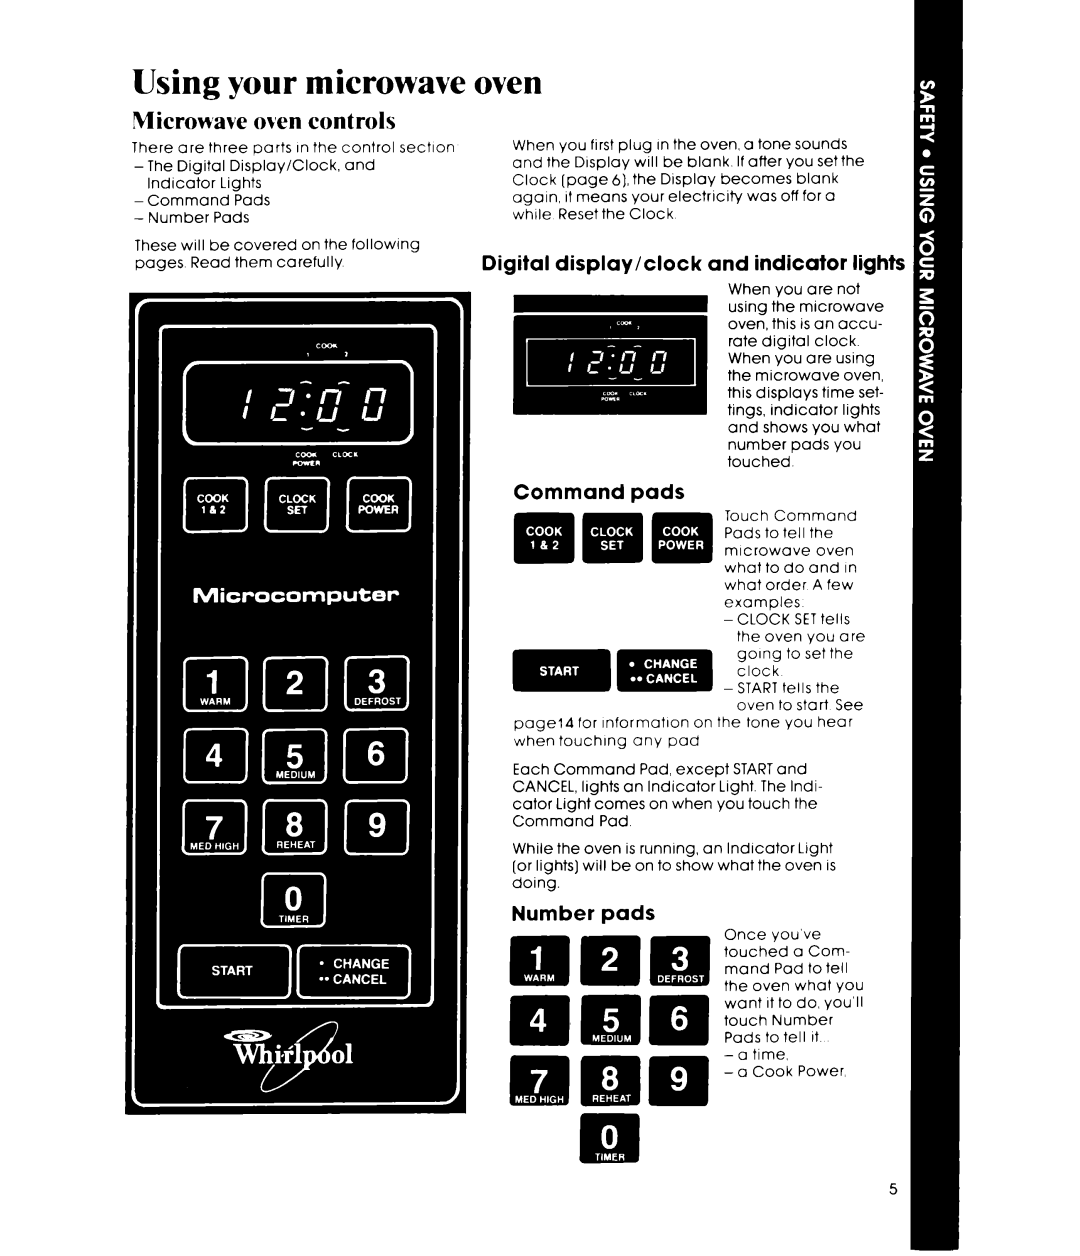 Whirlpool 252 manual Using your microwave, Microwave oven controls, Digital display/clock and indicator, Command pads 